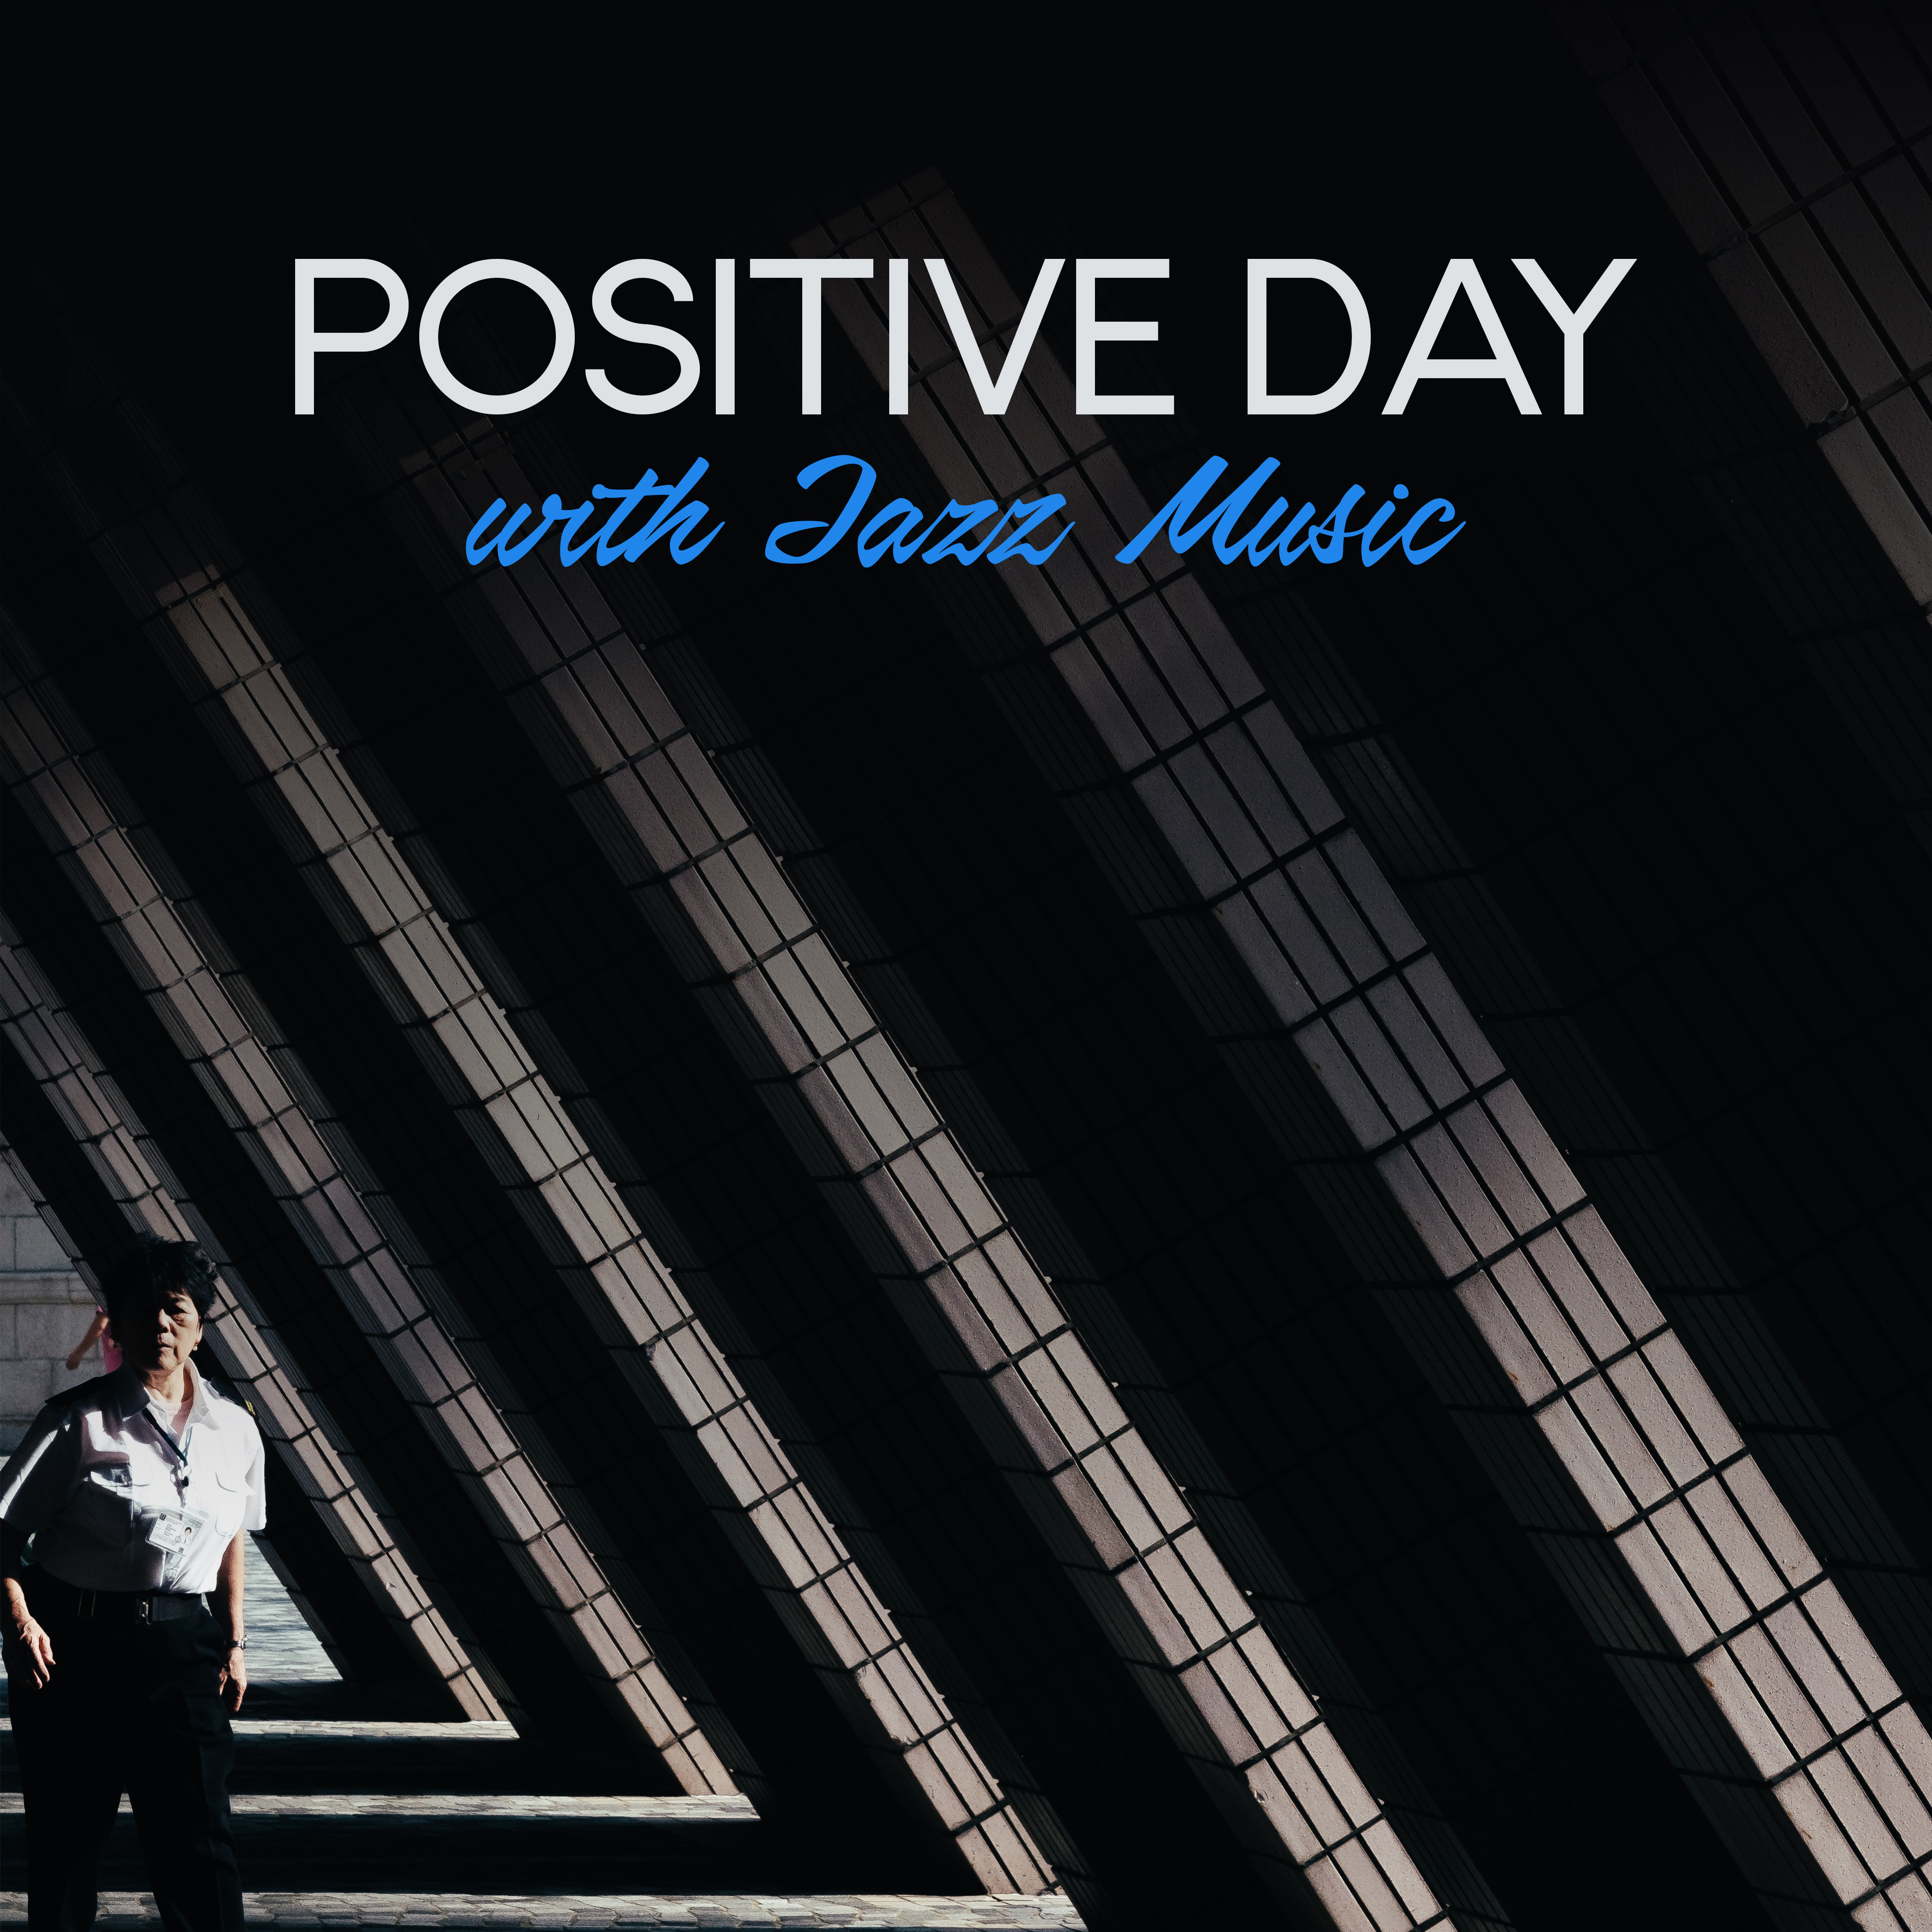 Positive Day with Jazz Music